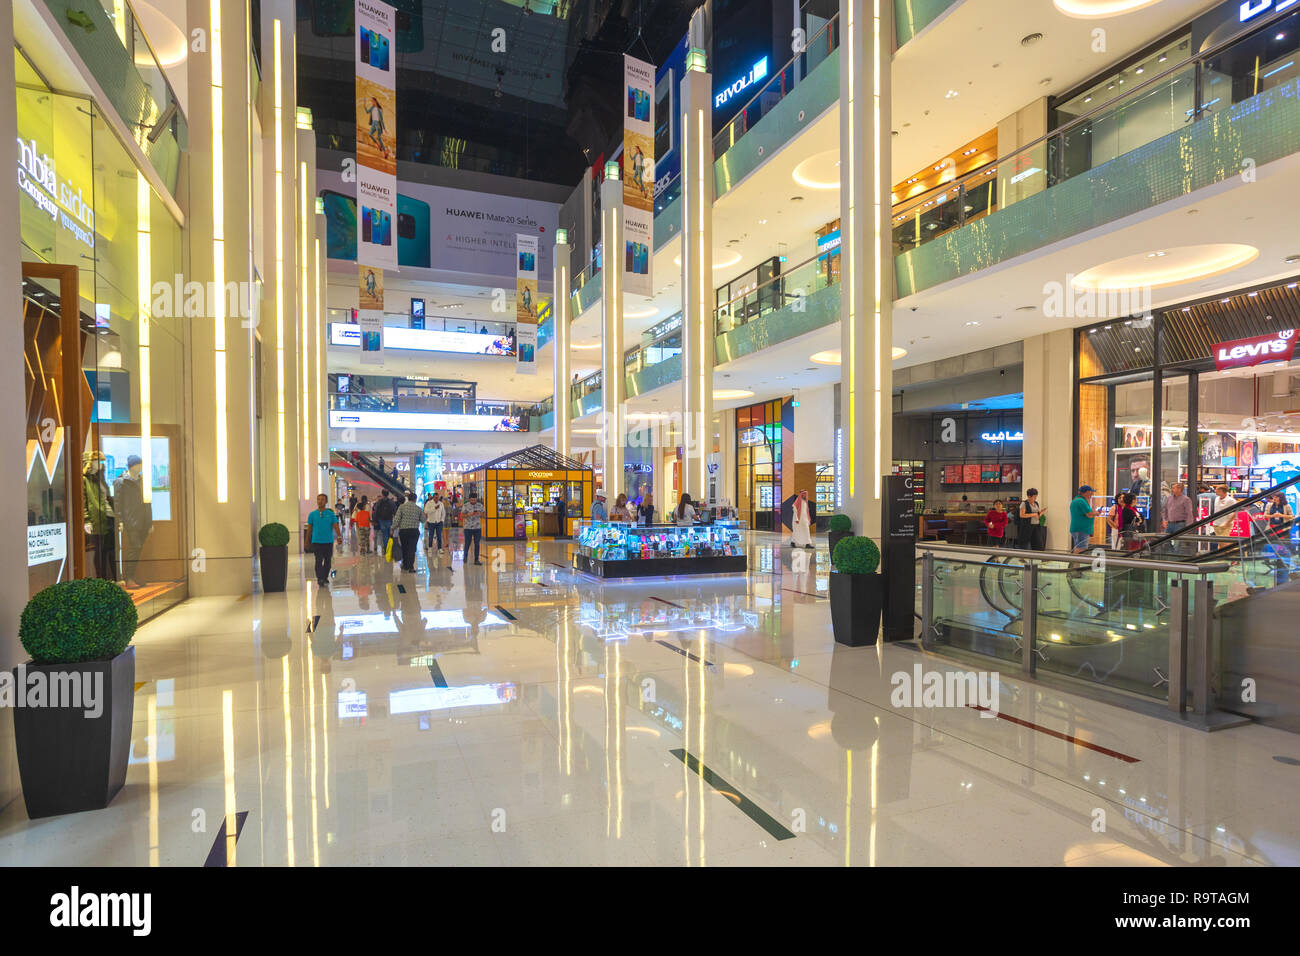 DUBAI, UAE - NOV 12, 2018: shoppers in Dubai Mall, the world's largest shopping mall based on total area and sixth largest by gross leasable area Stock Photo